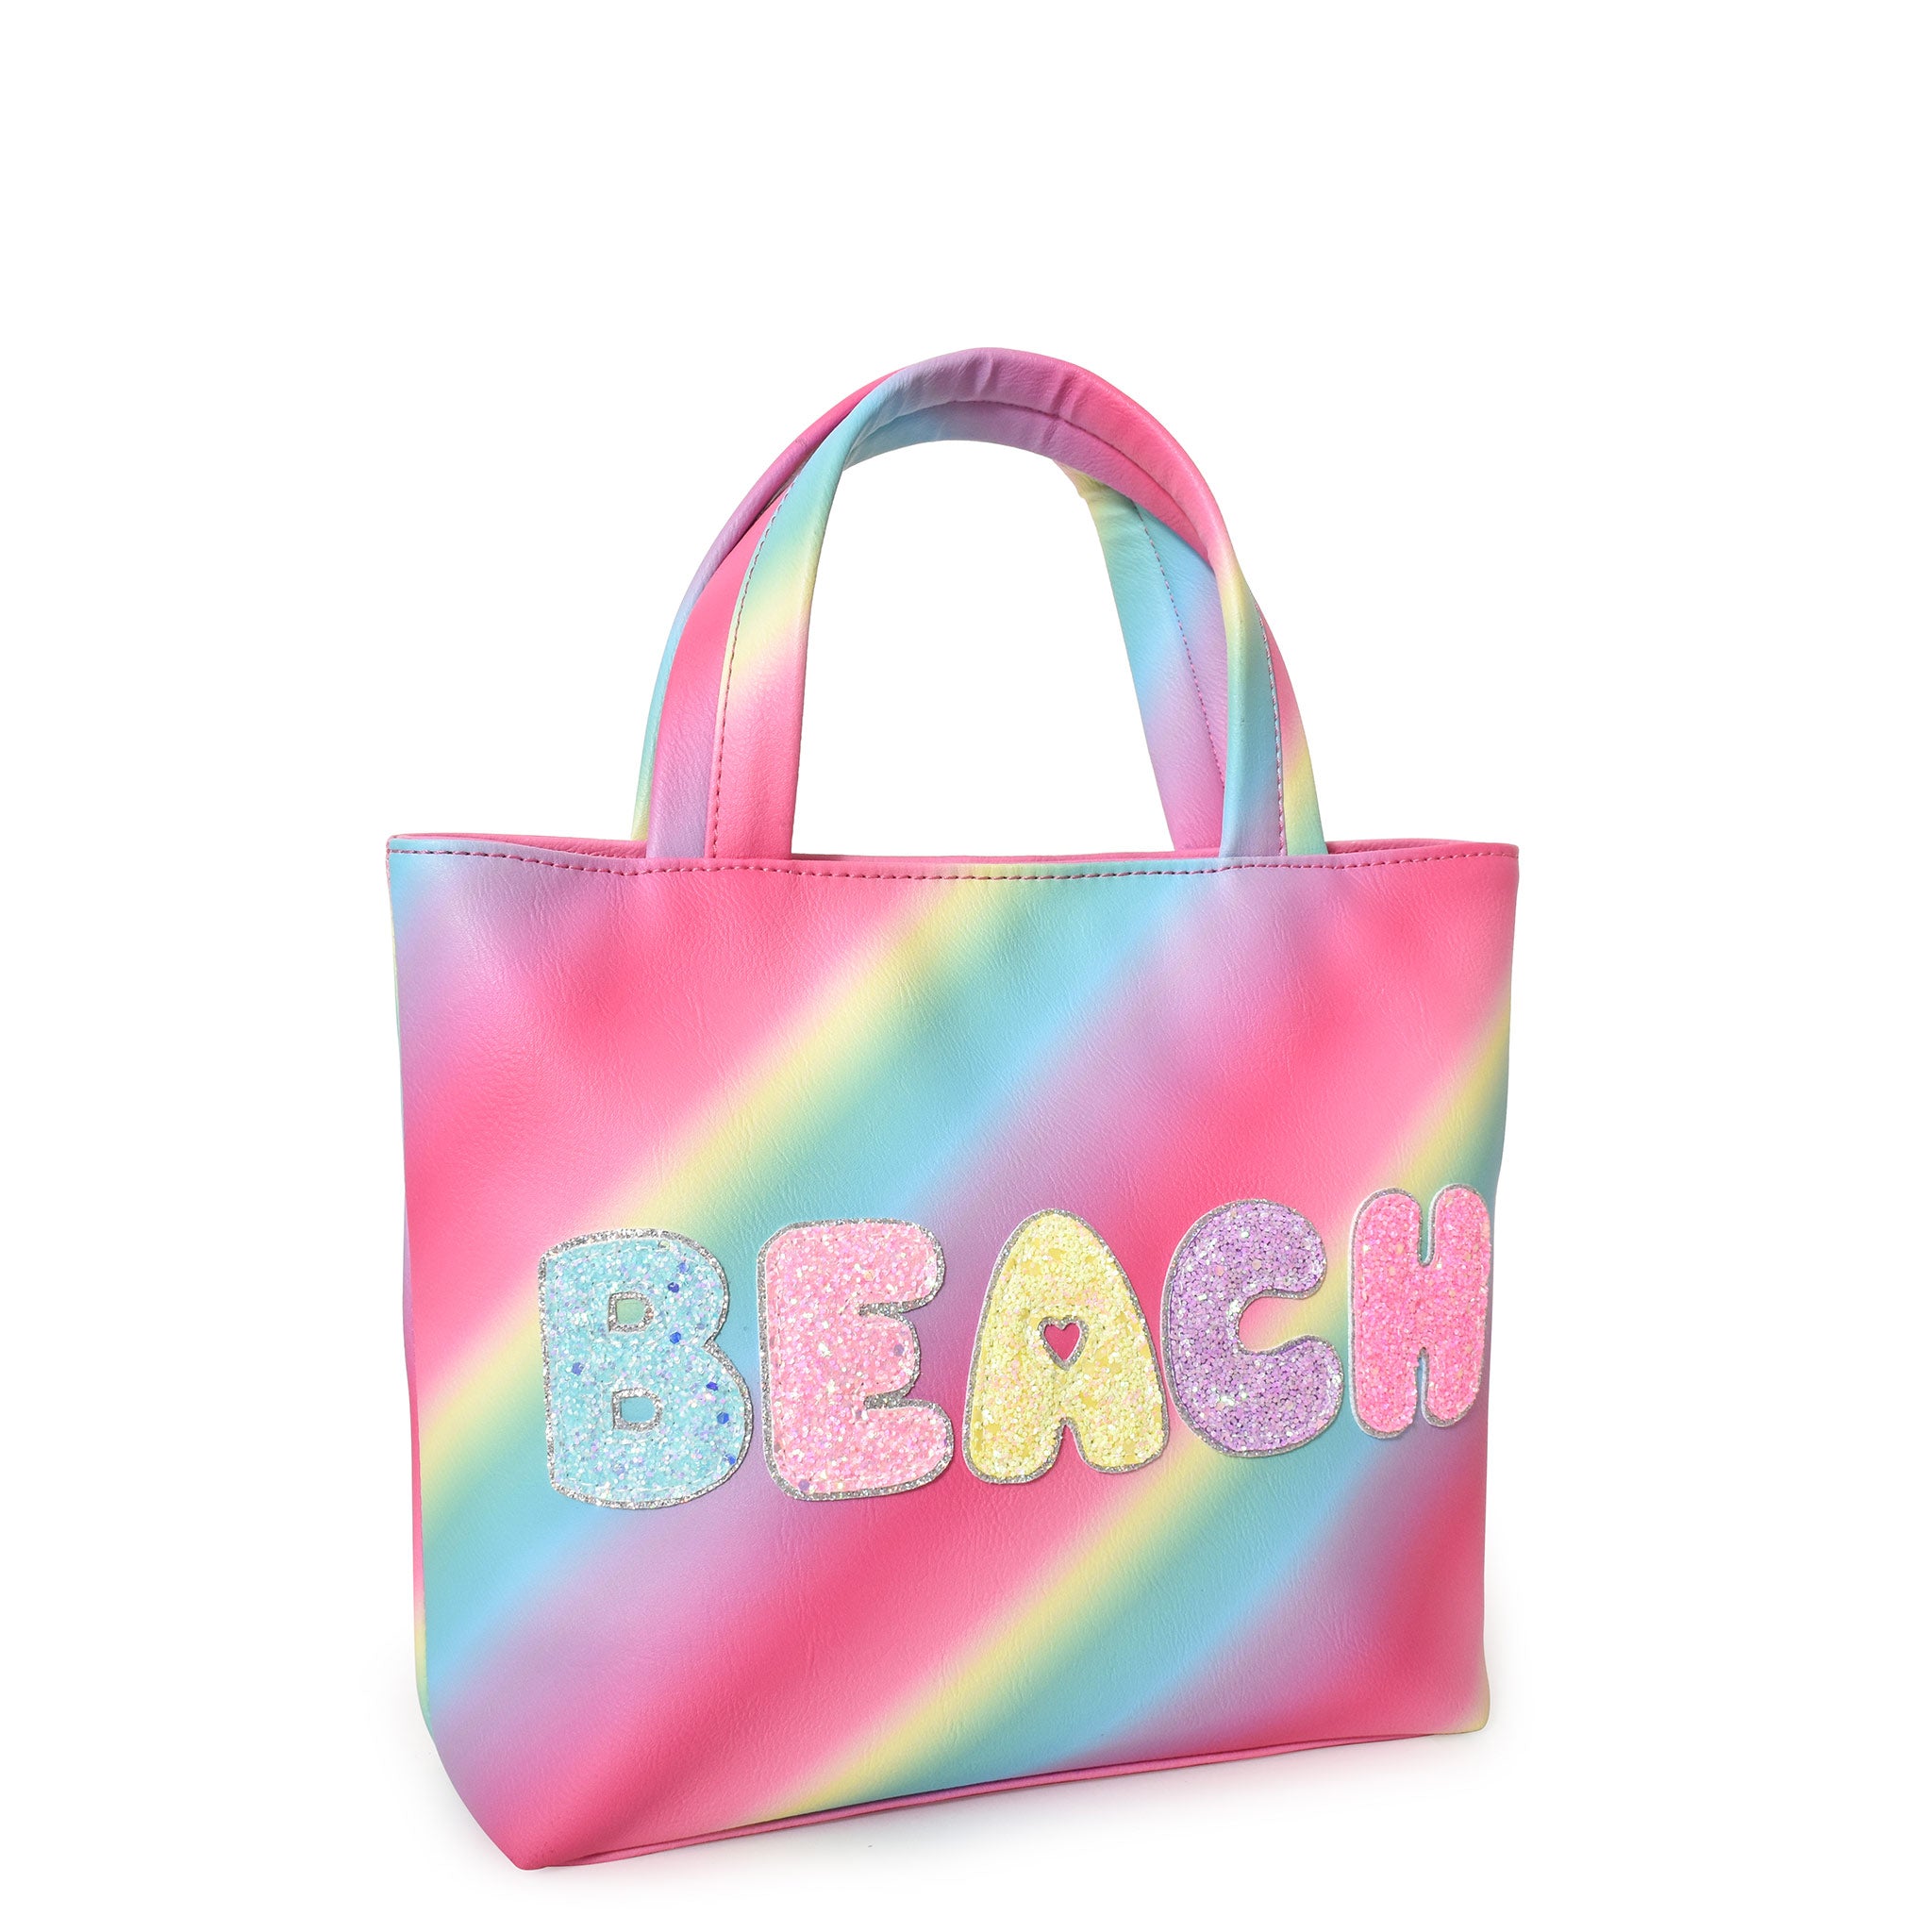 Side view of a rainbow ombre mini tote bag embellished with glitter bubble letters 'BEACH' appliqué.